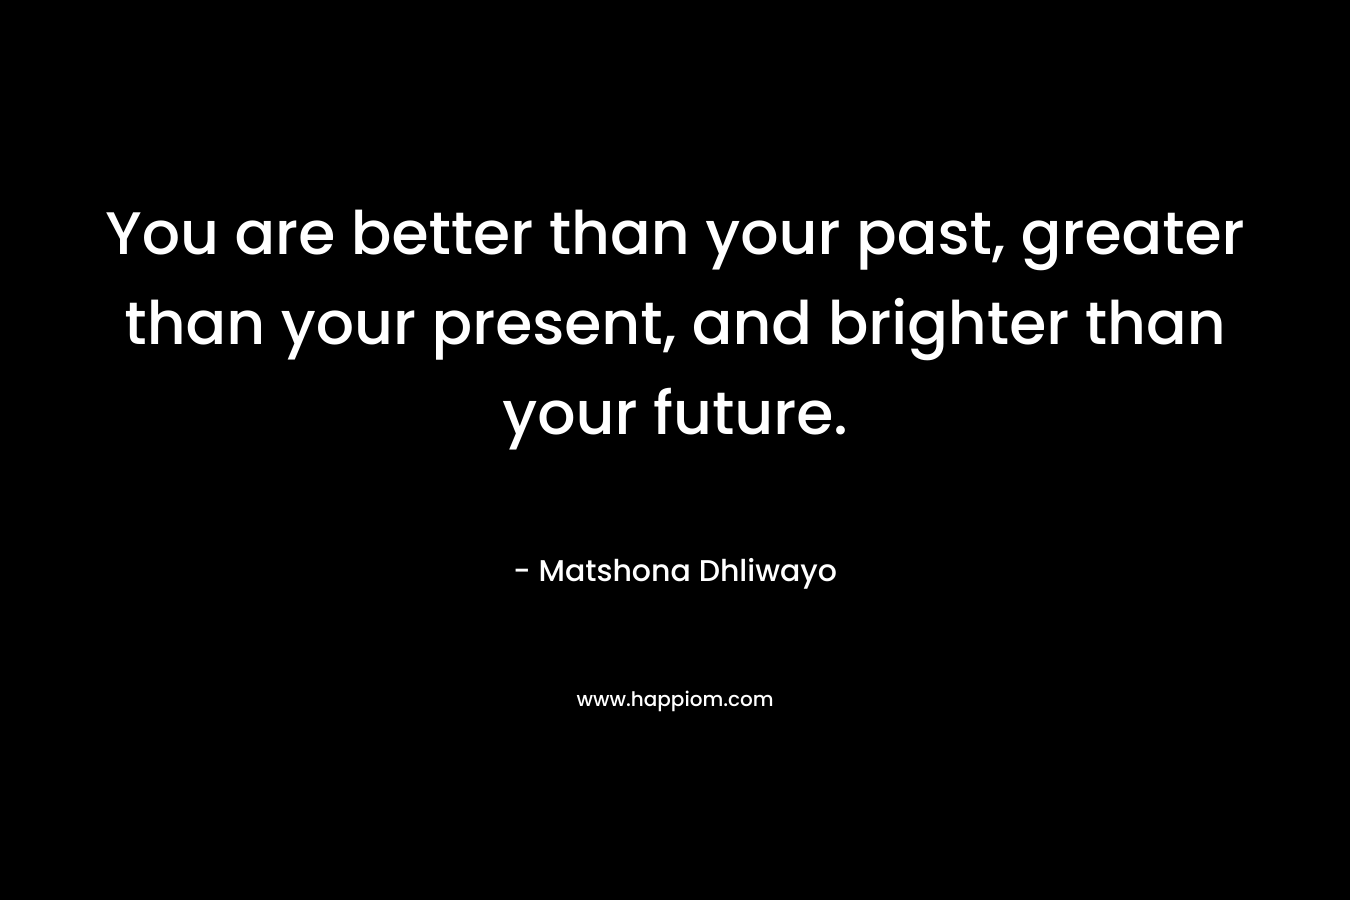 You are better than your past, greater than your present, and brighter than your future.